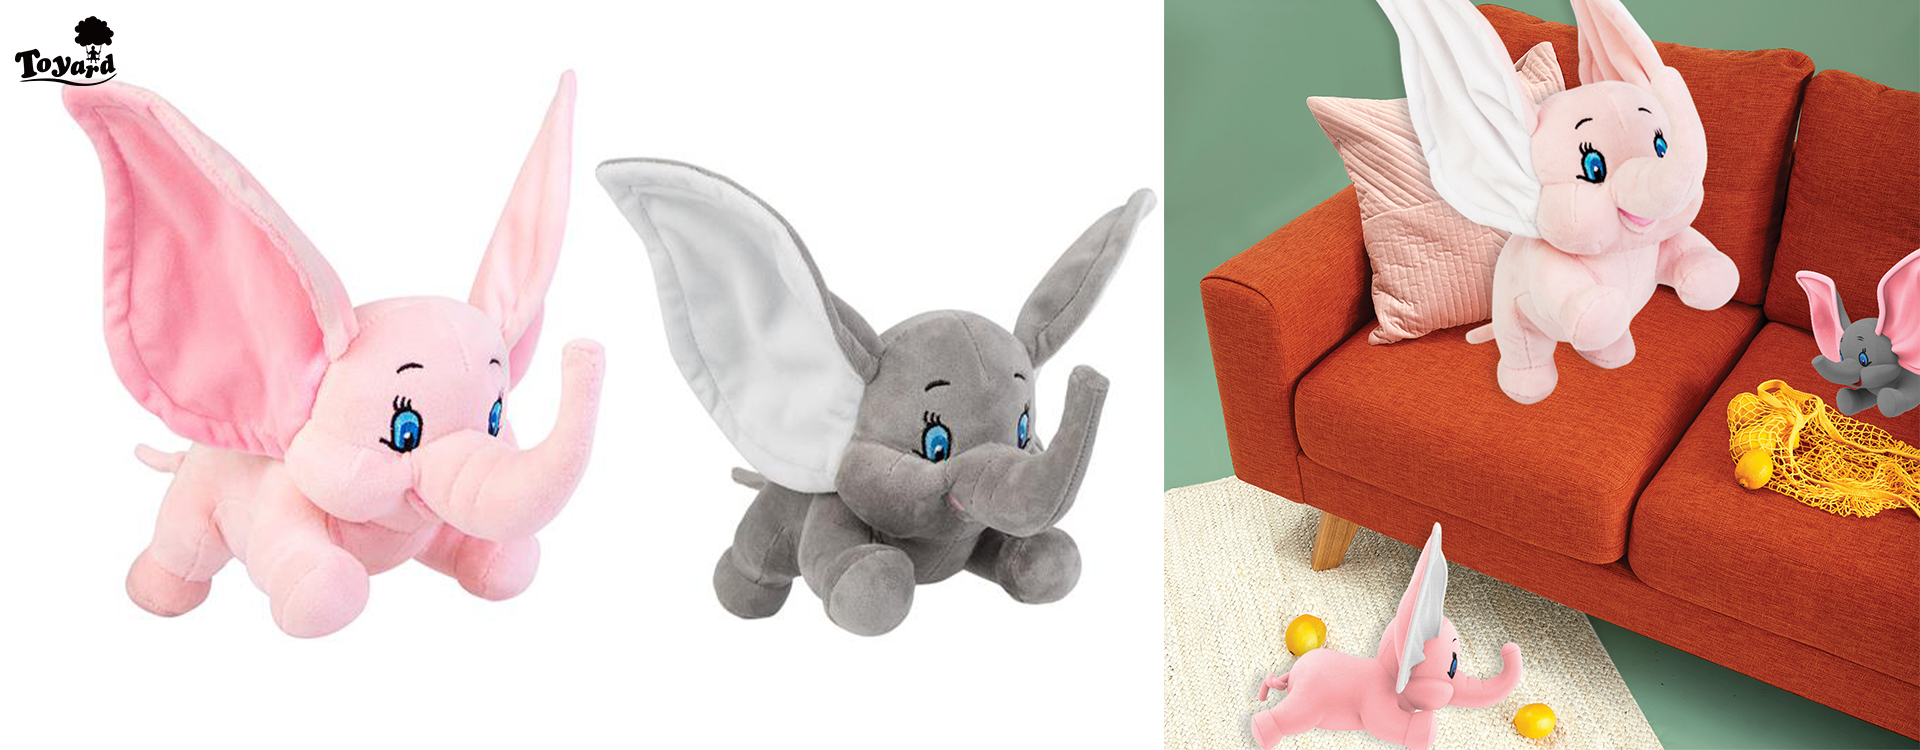 cute colored plushies have two colors pink and grey